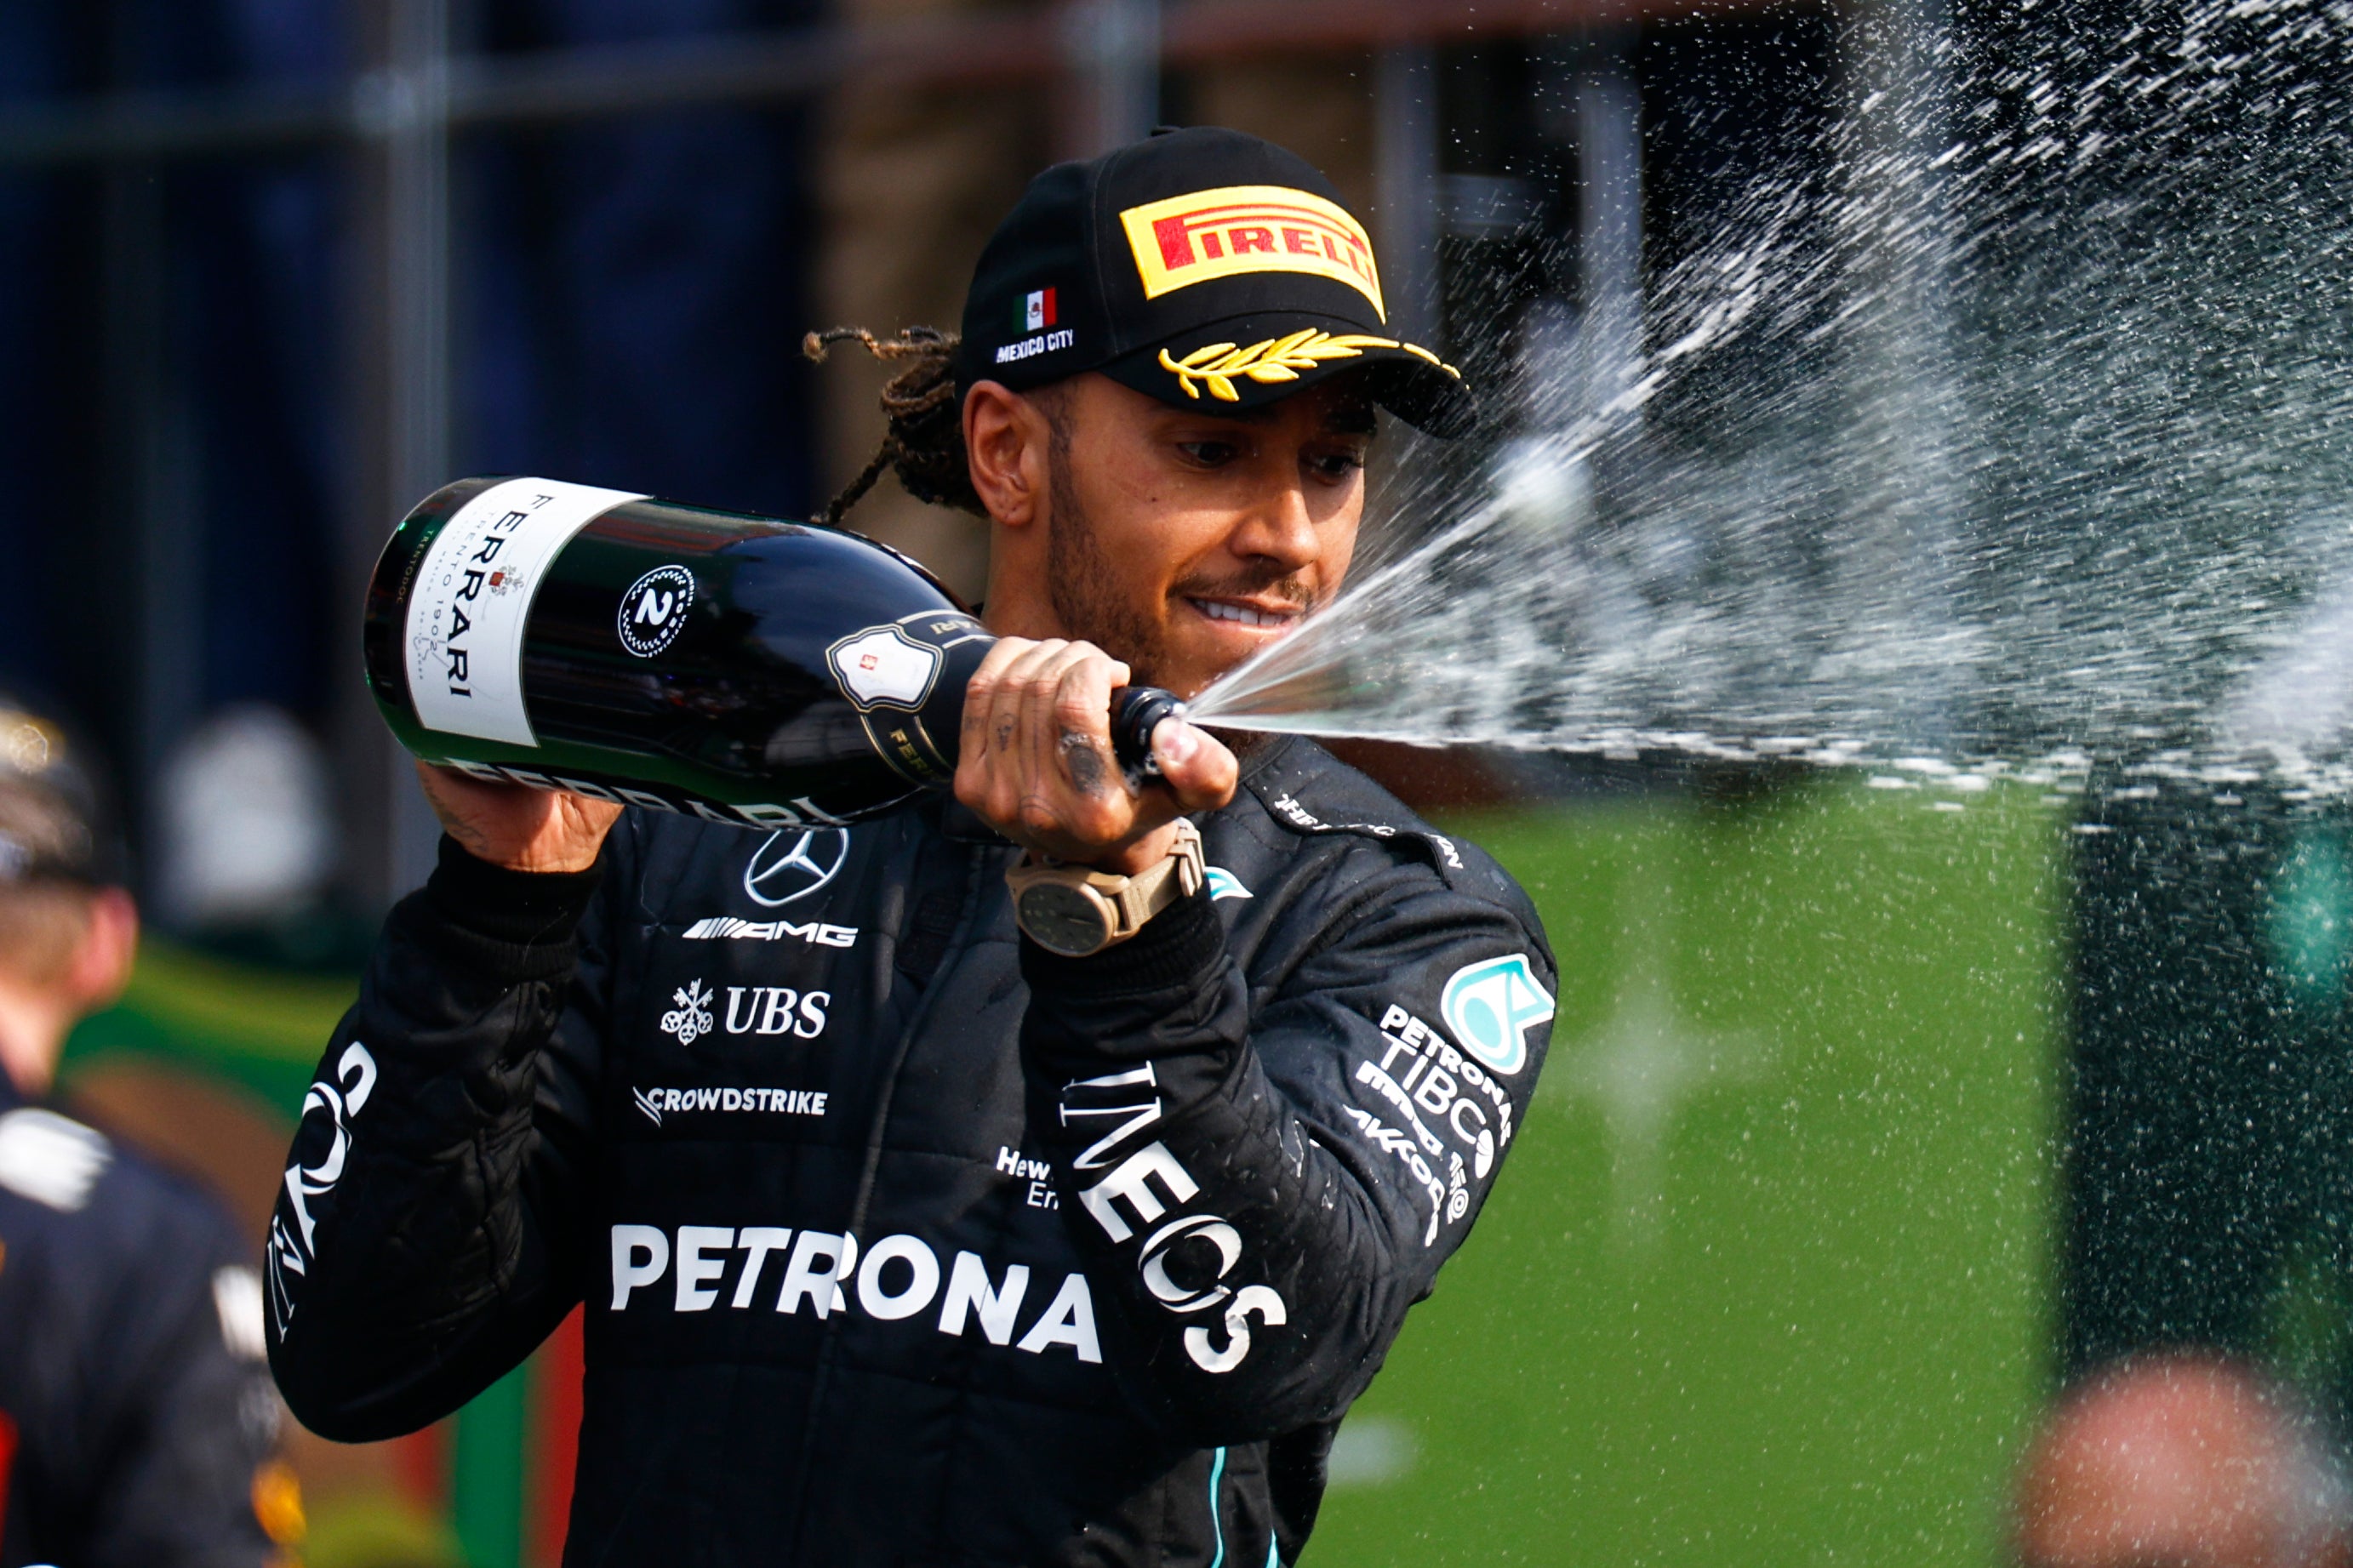 Lewis Hamilton said it was “awkward” to be booed by the Mexican Grand Prix crowd